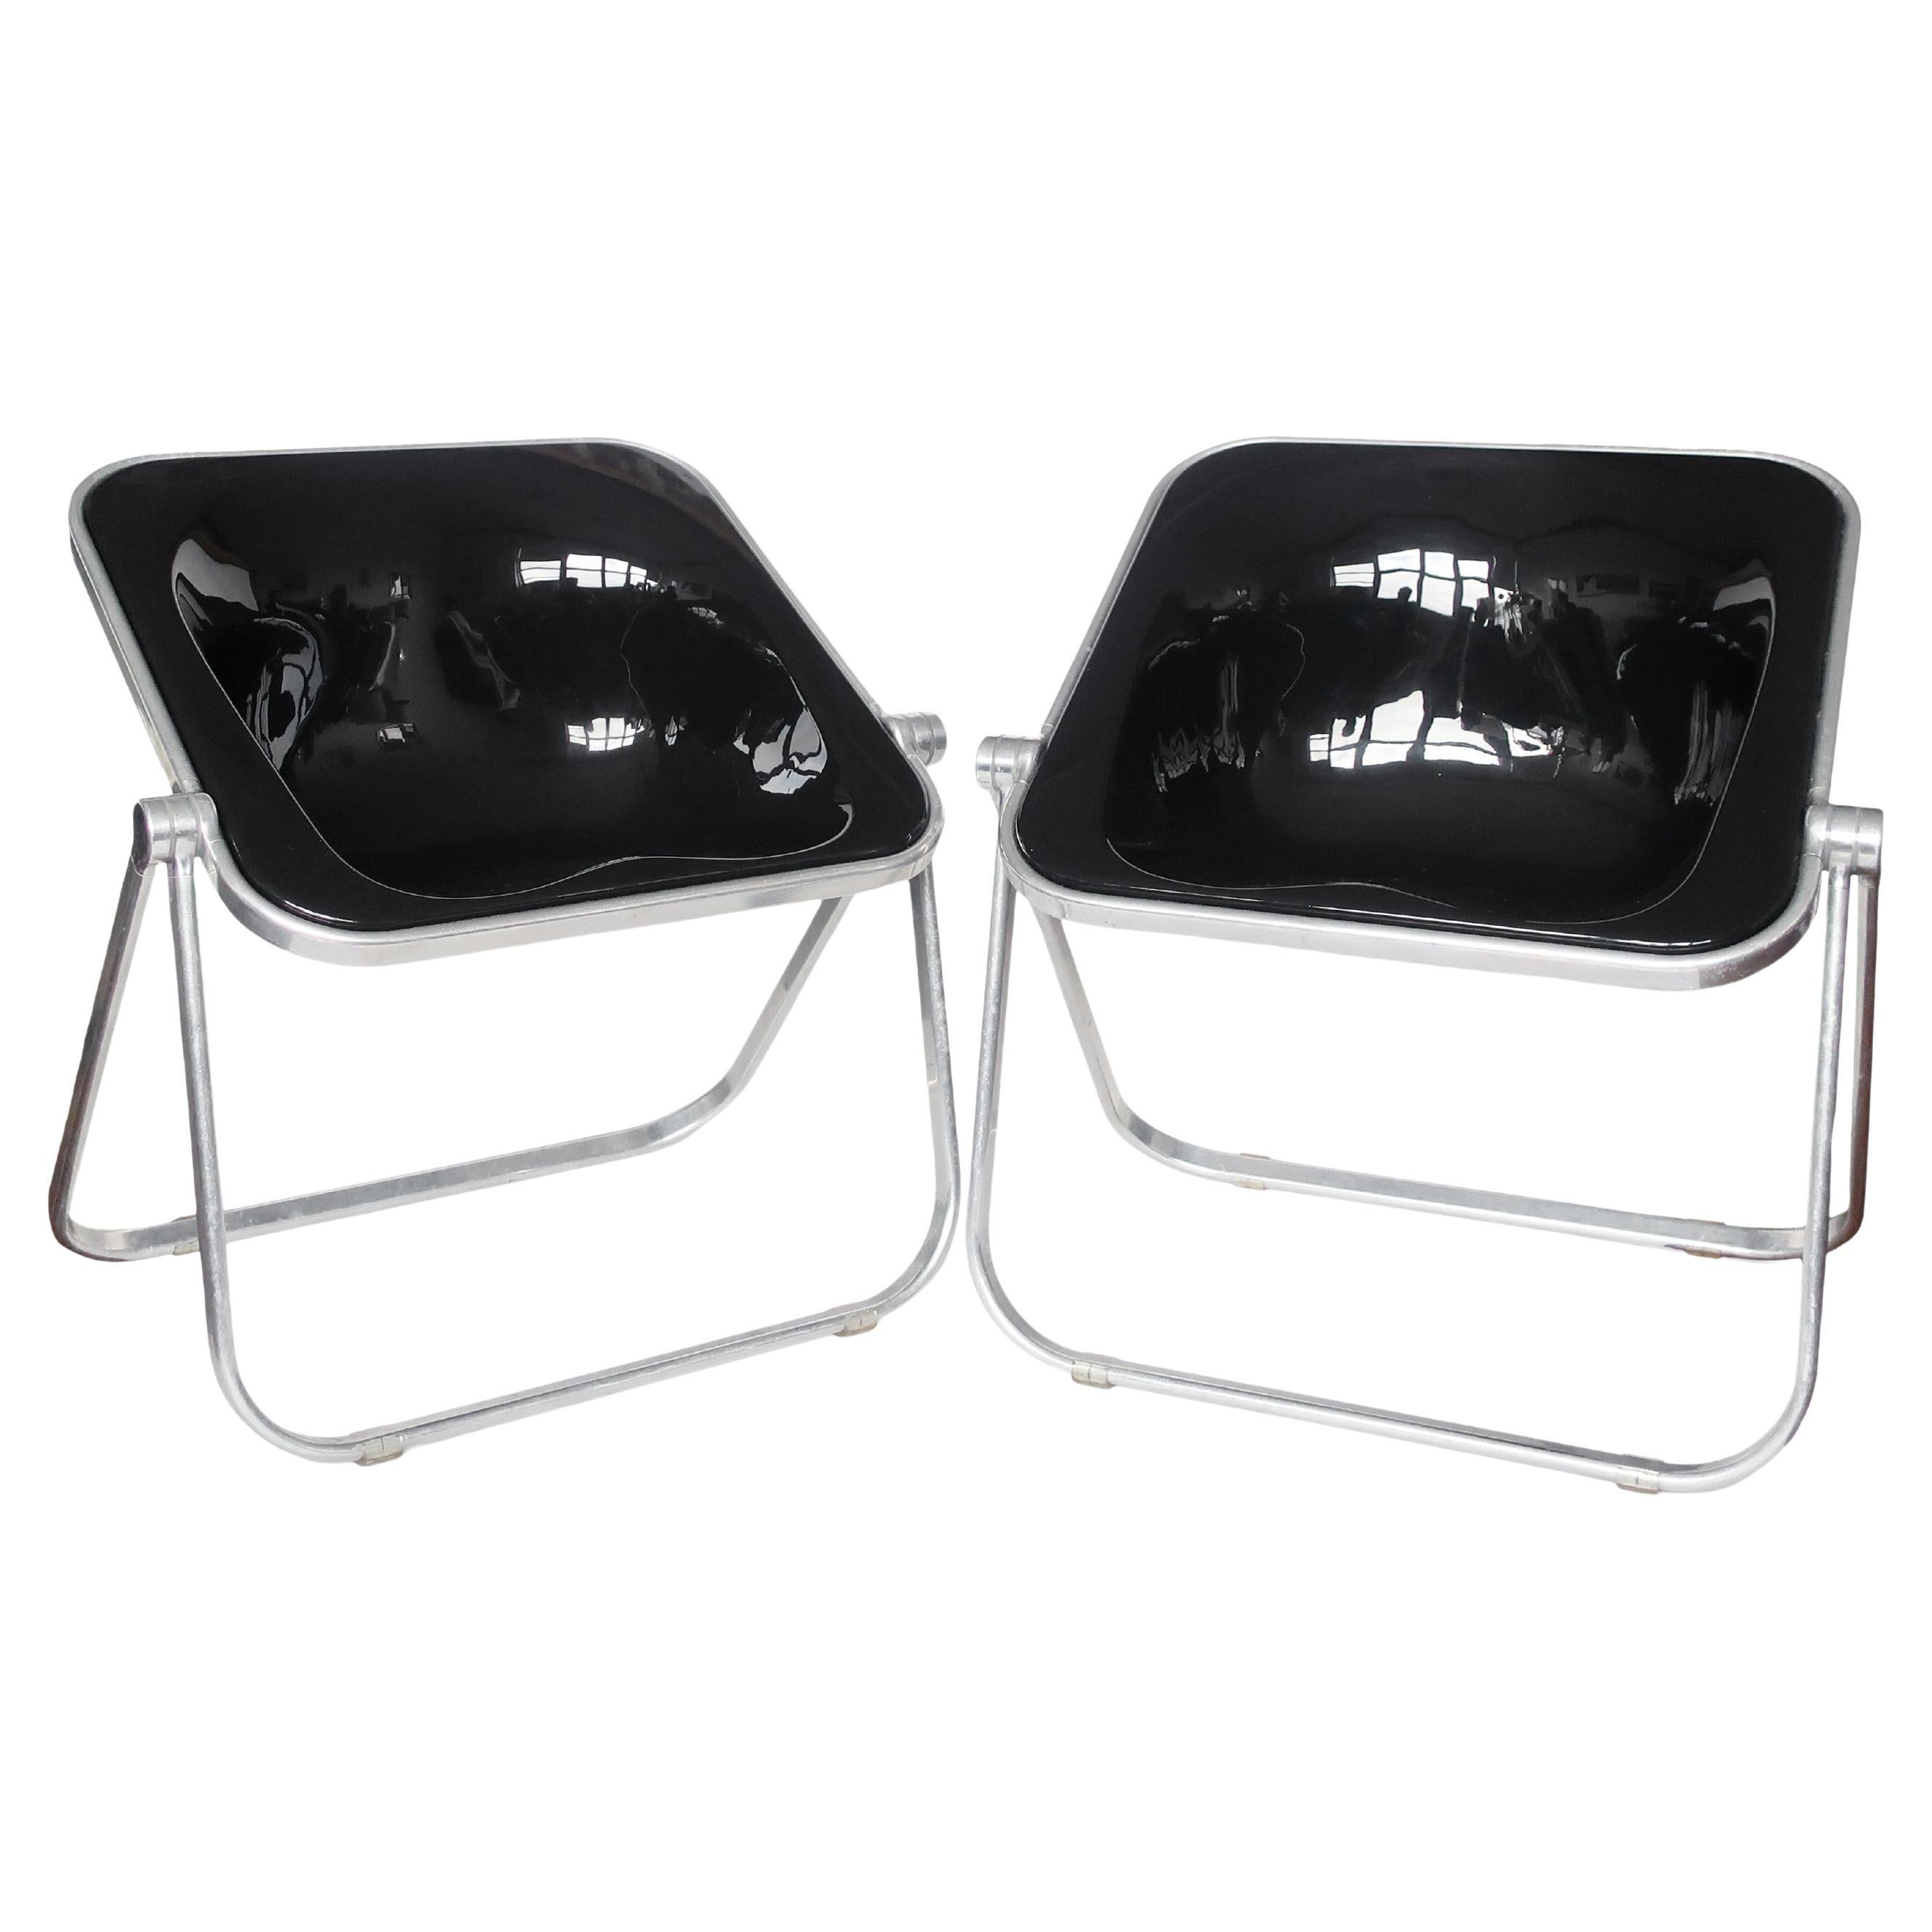 Pair of Black Plona Folding Chairs by Giancarlo Piretti for Castelli